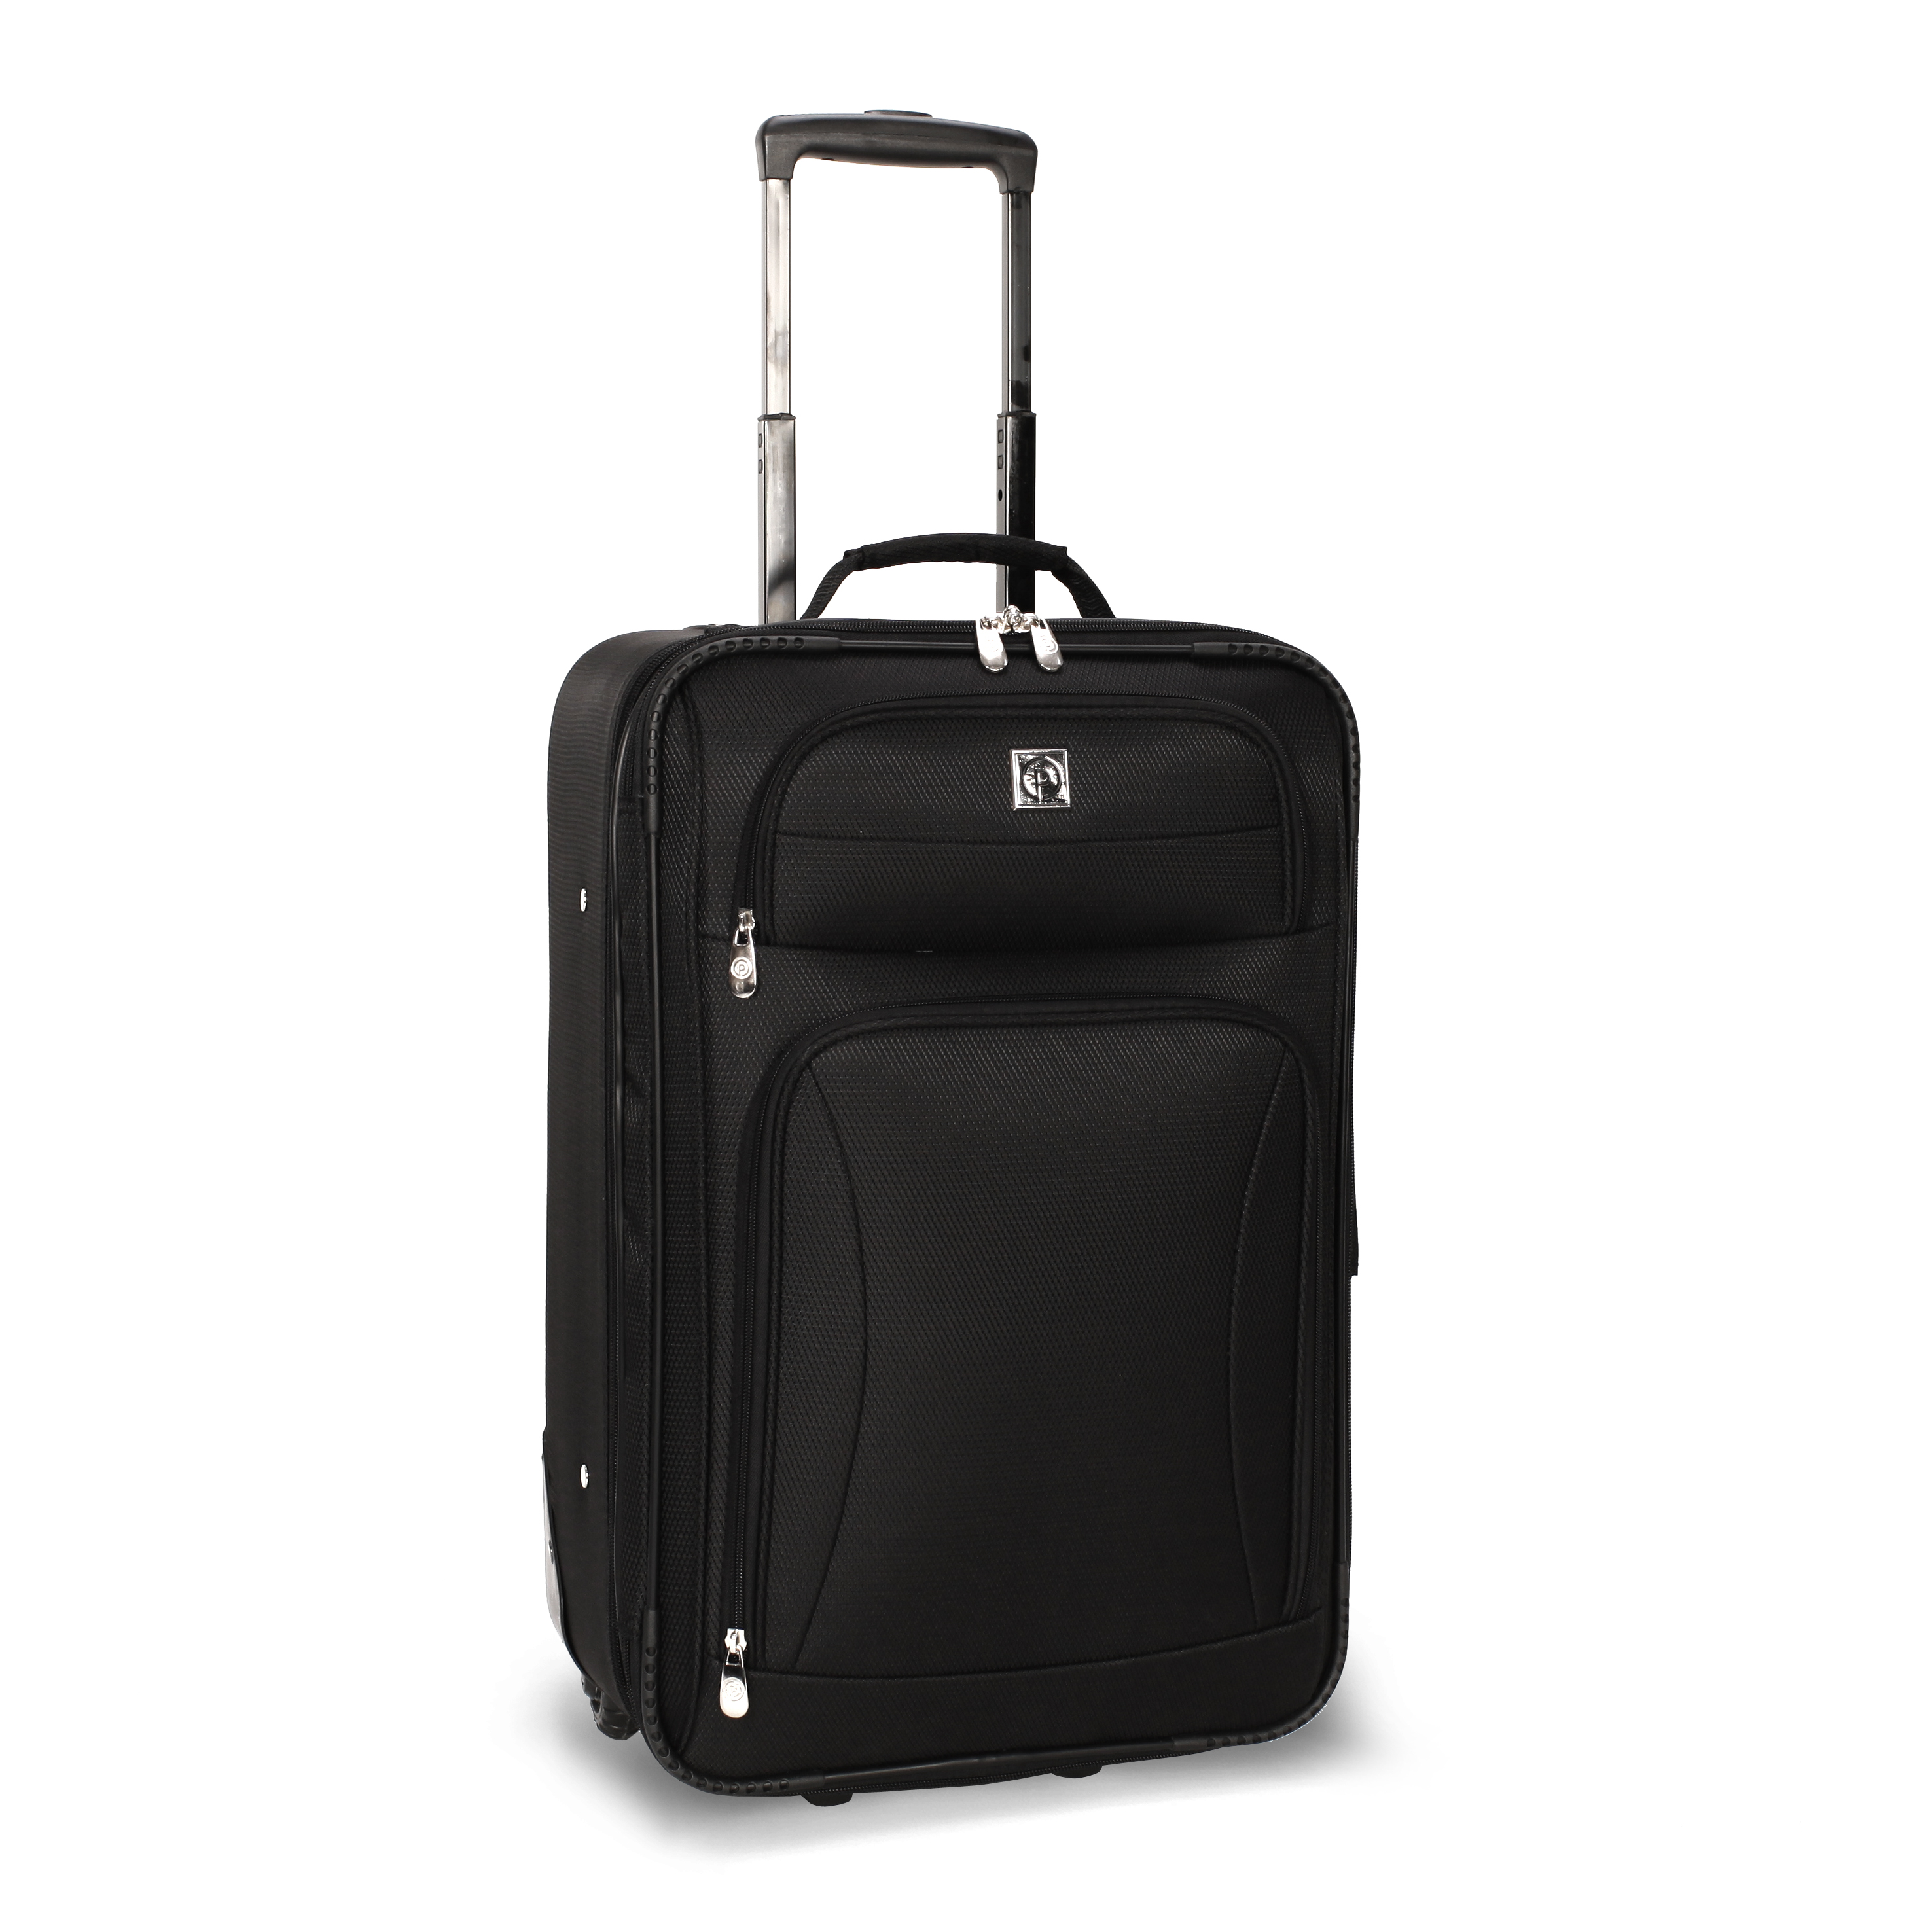 Protege 21" Regency Carry-on 2-Wheel Upright Luggage (Walmart Exclusive), Black - image 4 of 5